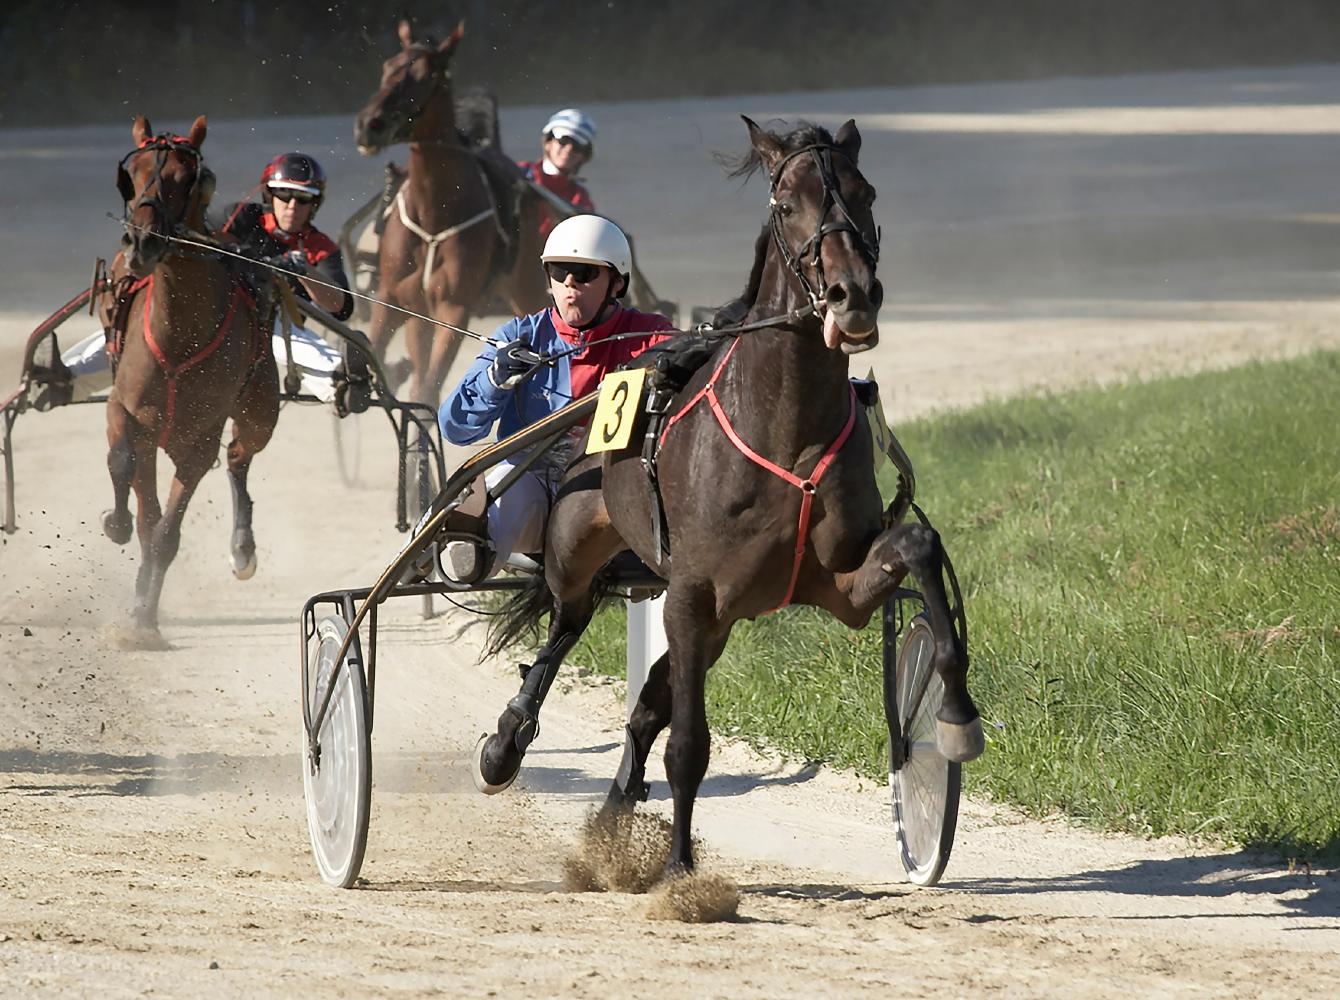 Contestants in a Harness or Trotting race